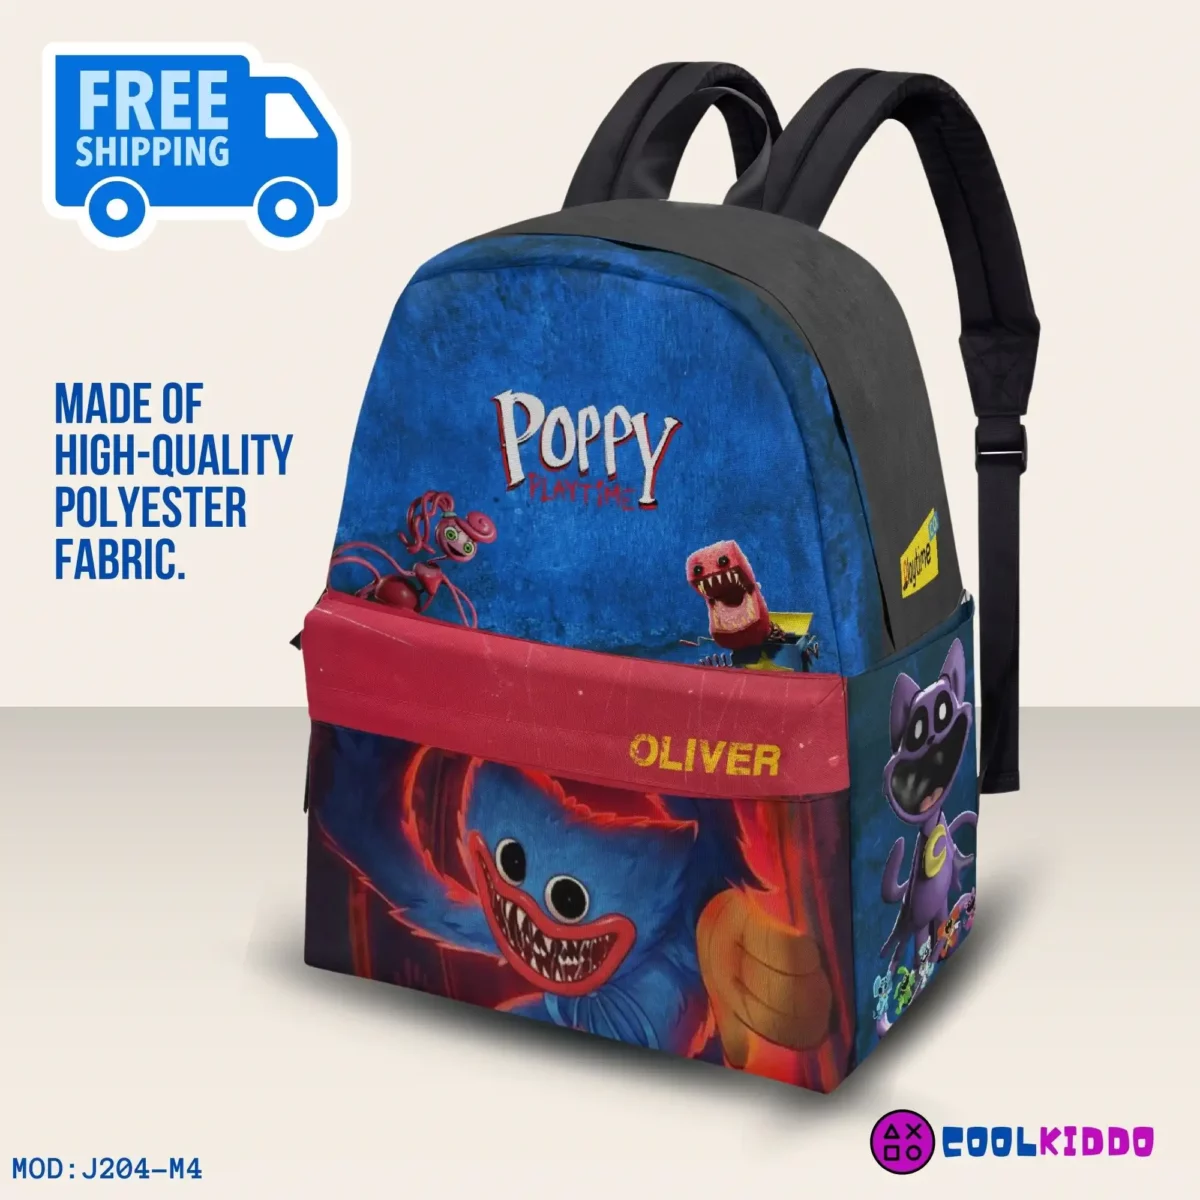 Poppy Playtime Videogame Inspired Bag – Ideal for School, Travel, and Sports Essentials, Three Sizes Cool Kiddo 10